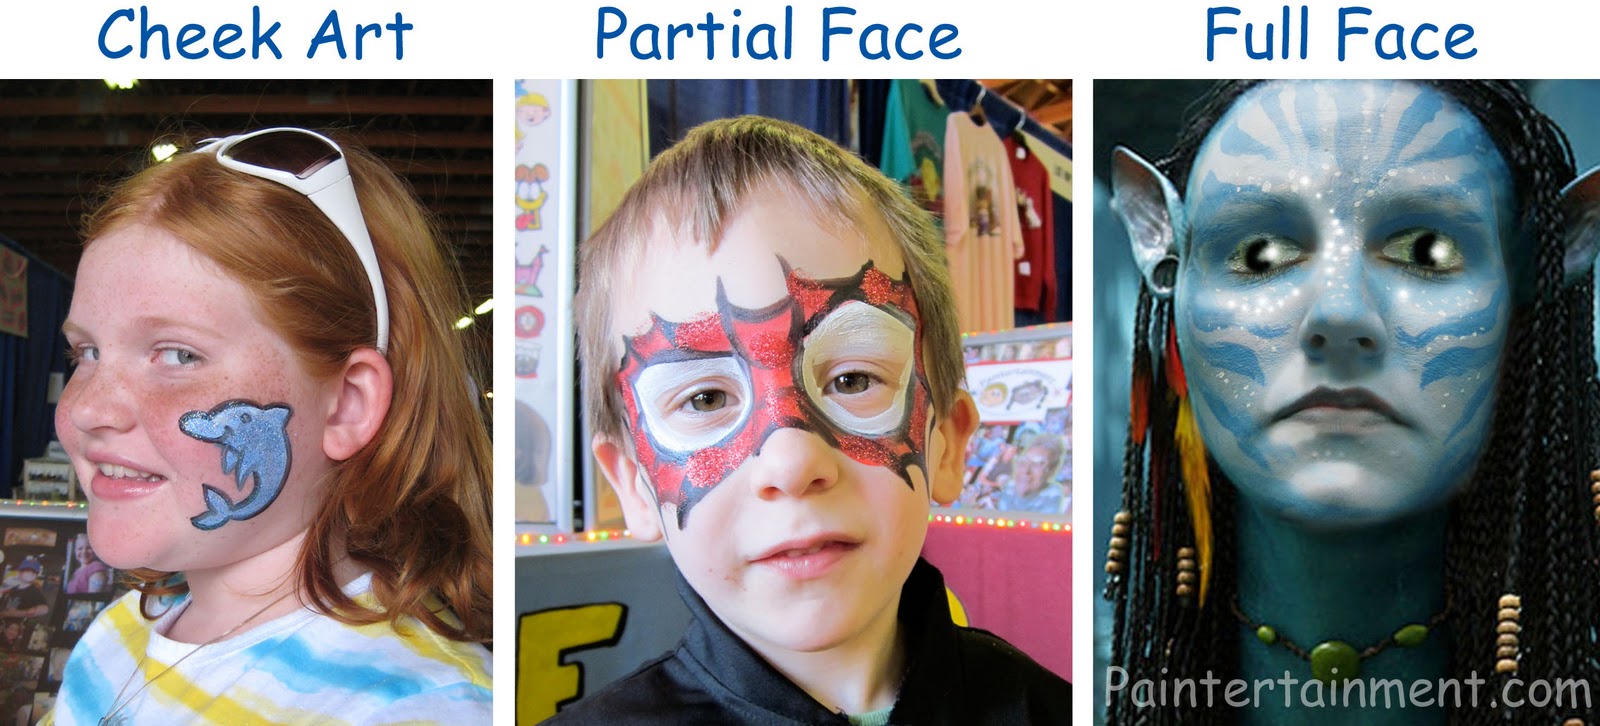 Face Painting - Rainbow Faces